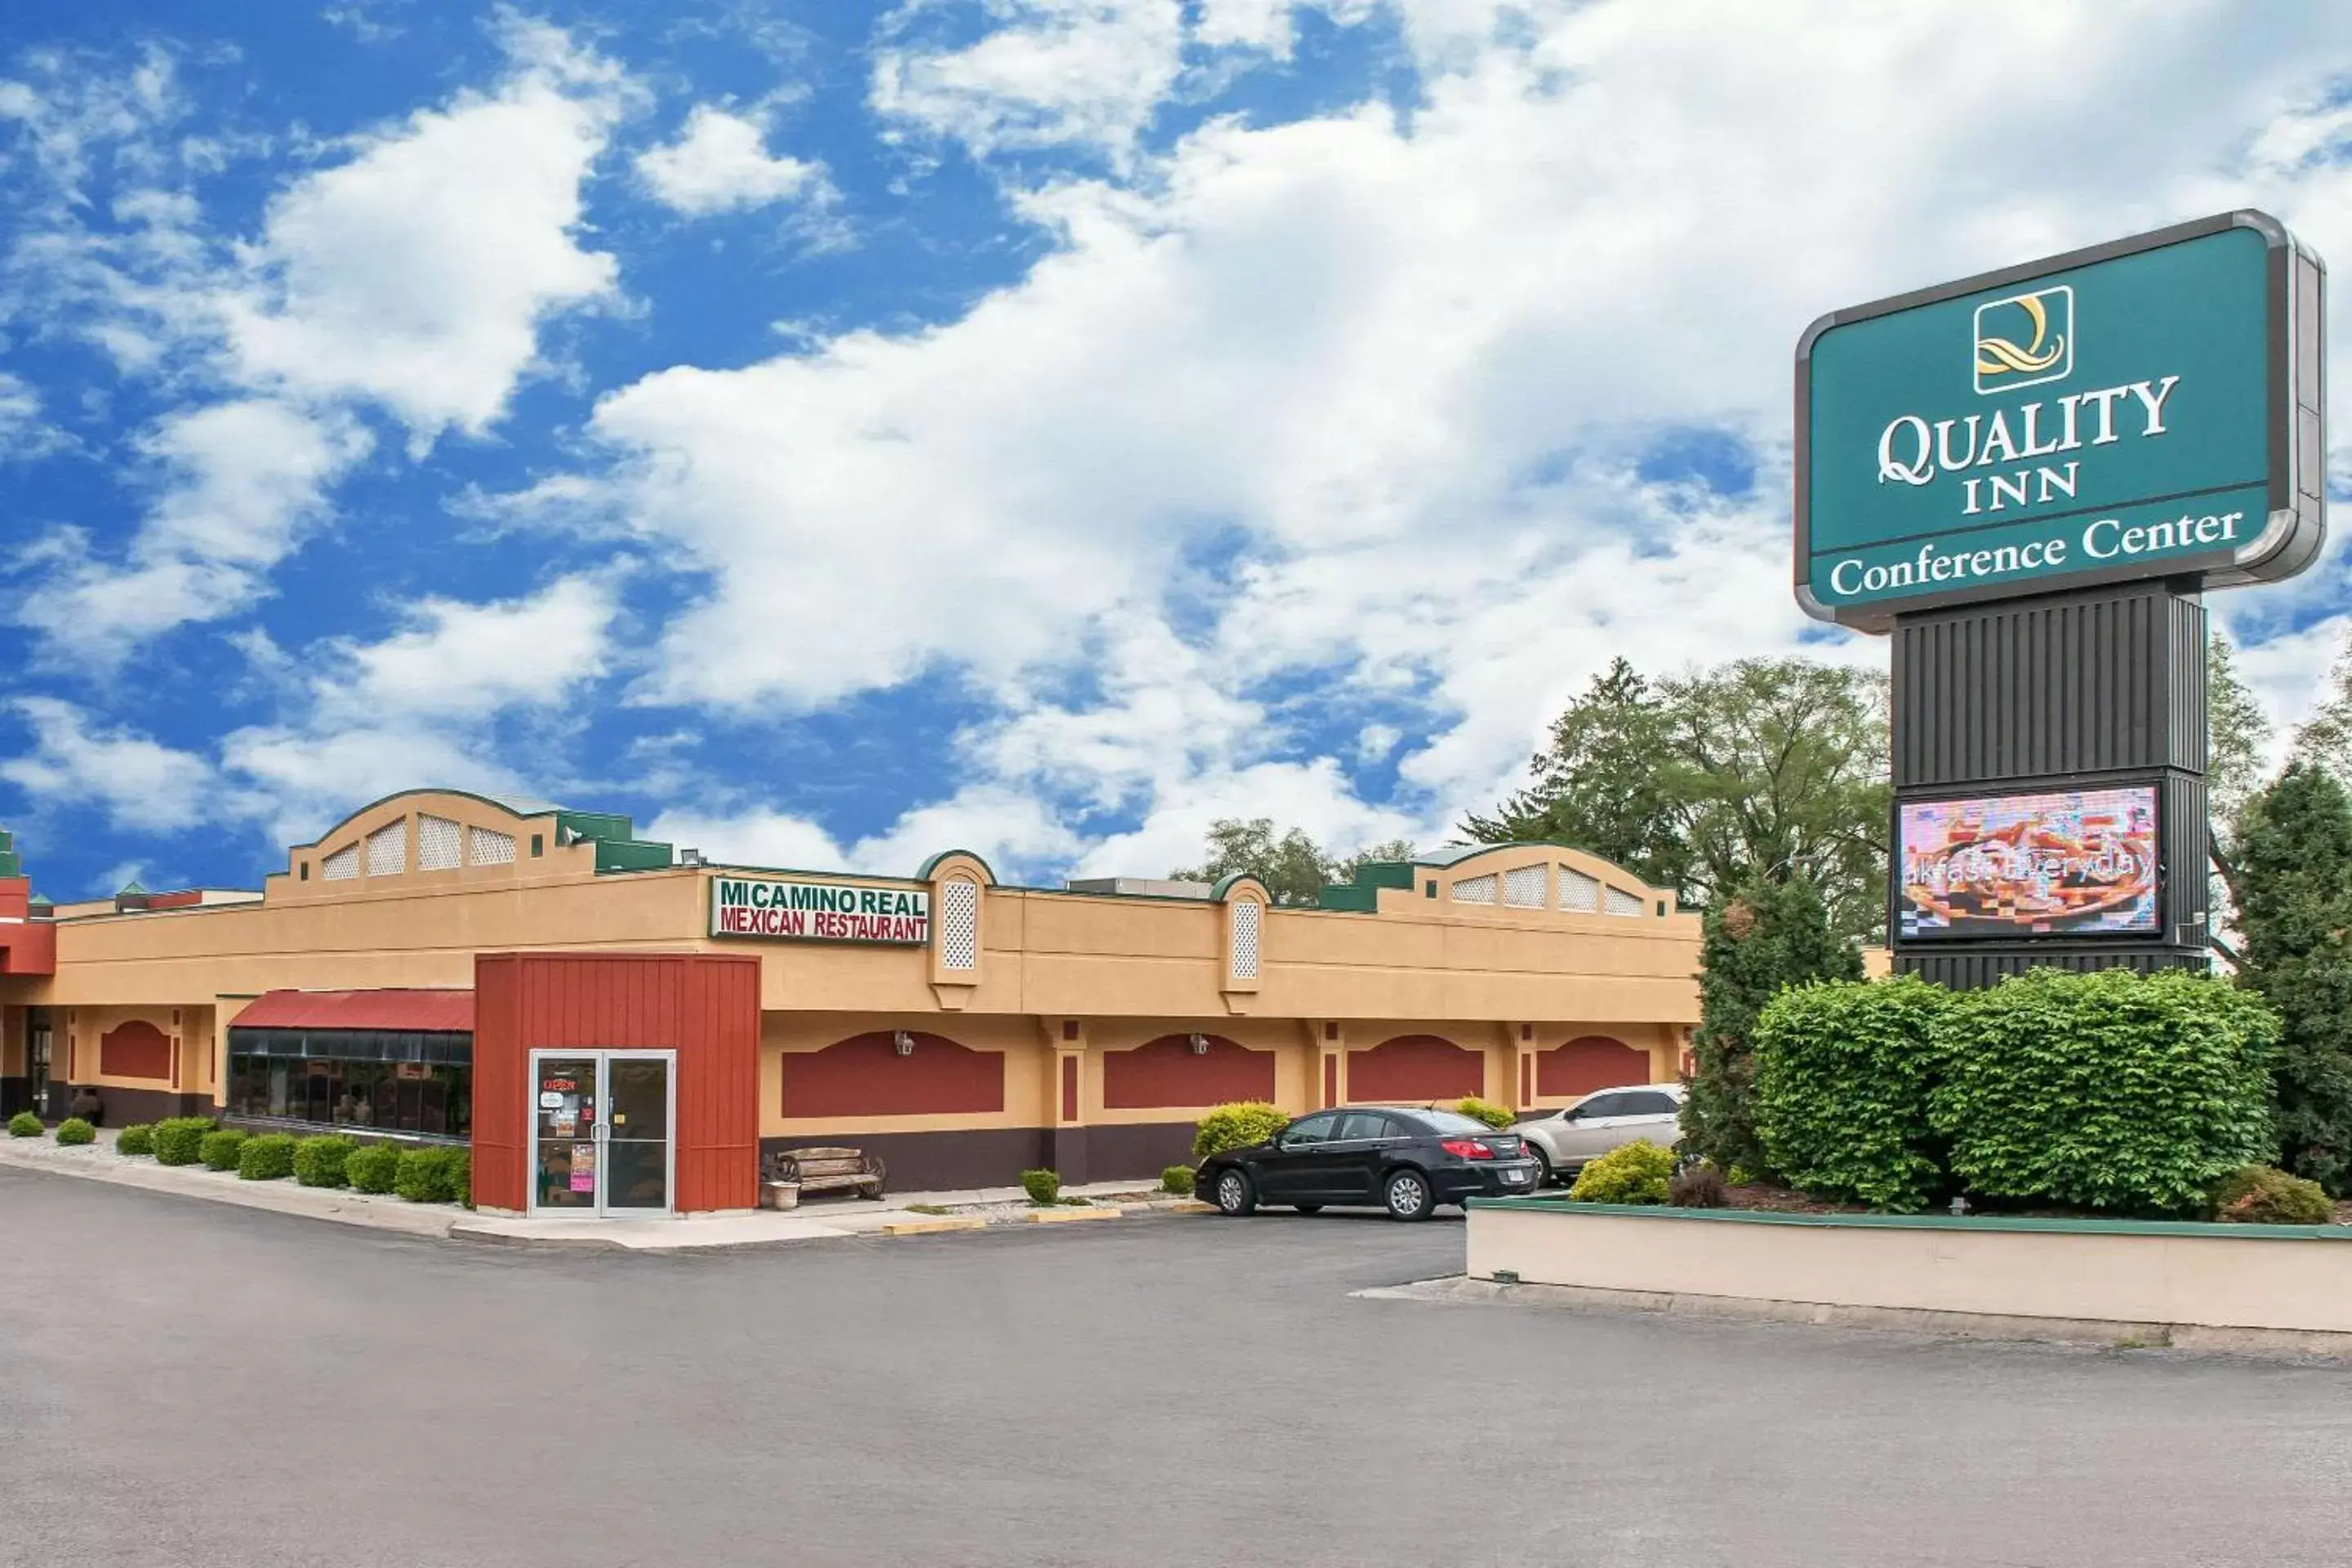 Property Building in Quality Inn Conference Center Logansport